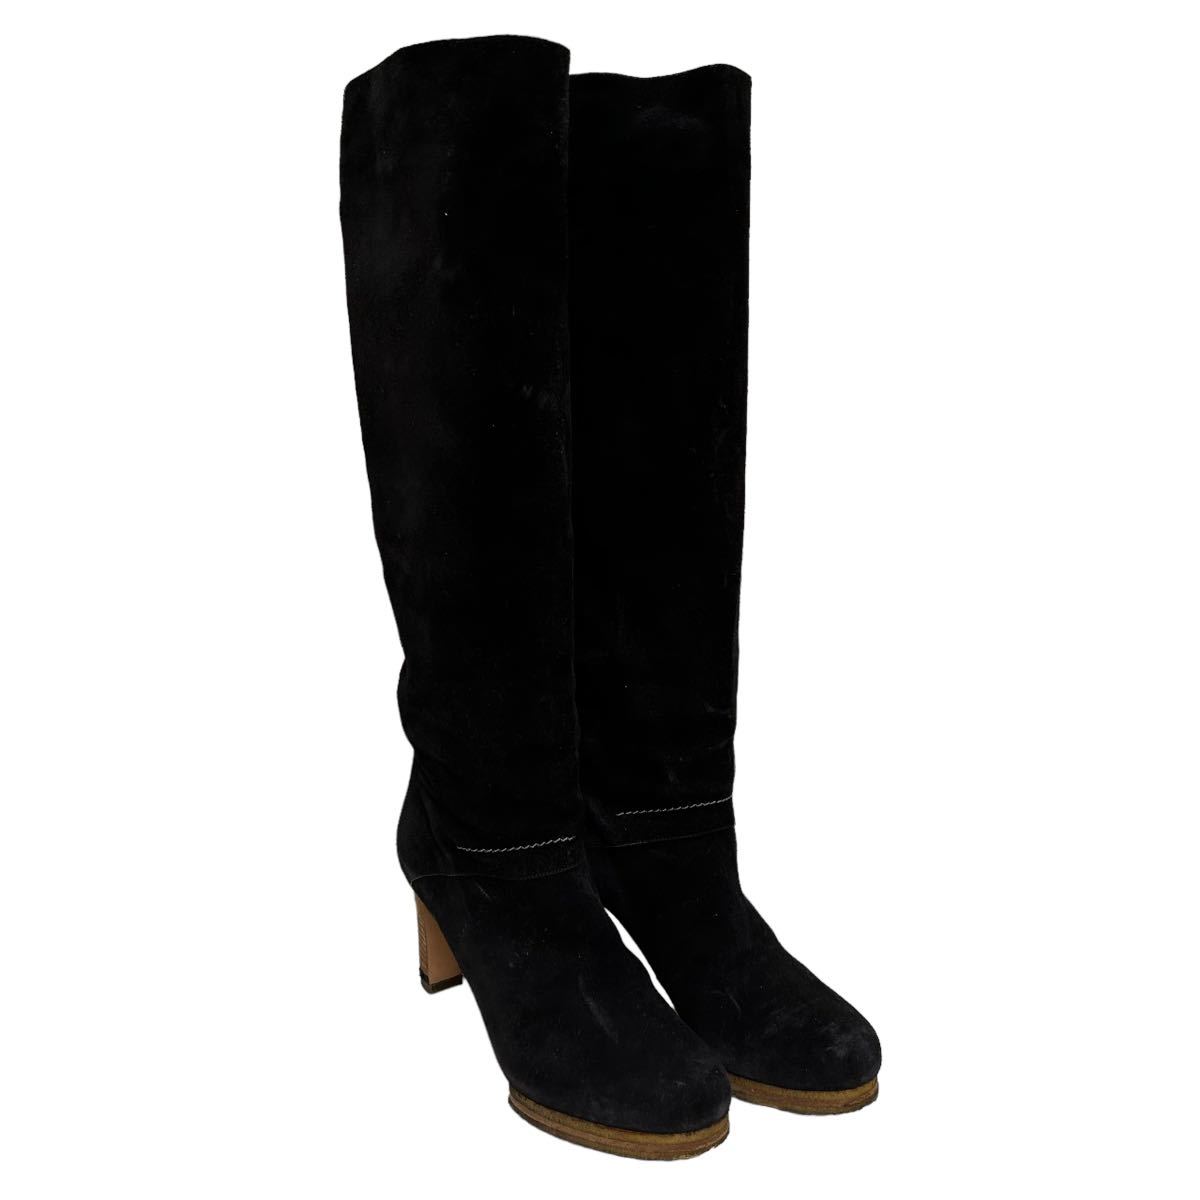 BB839 Italy made Chloe Chloe lady's long boots knee high boots 38 approximately 24cm black suede original leather 